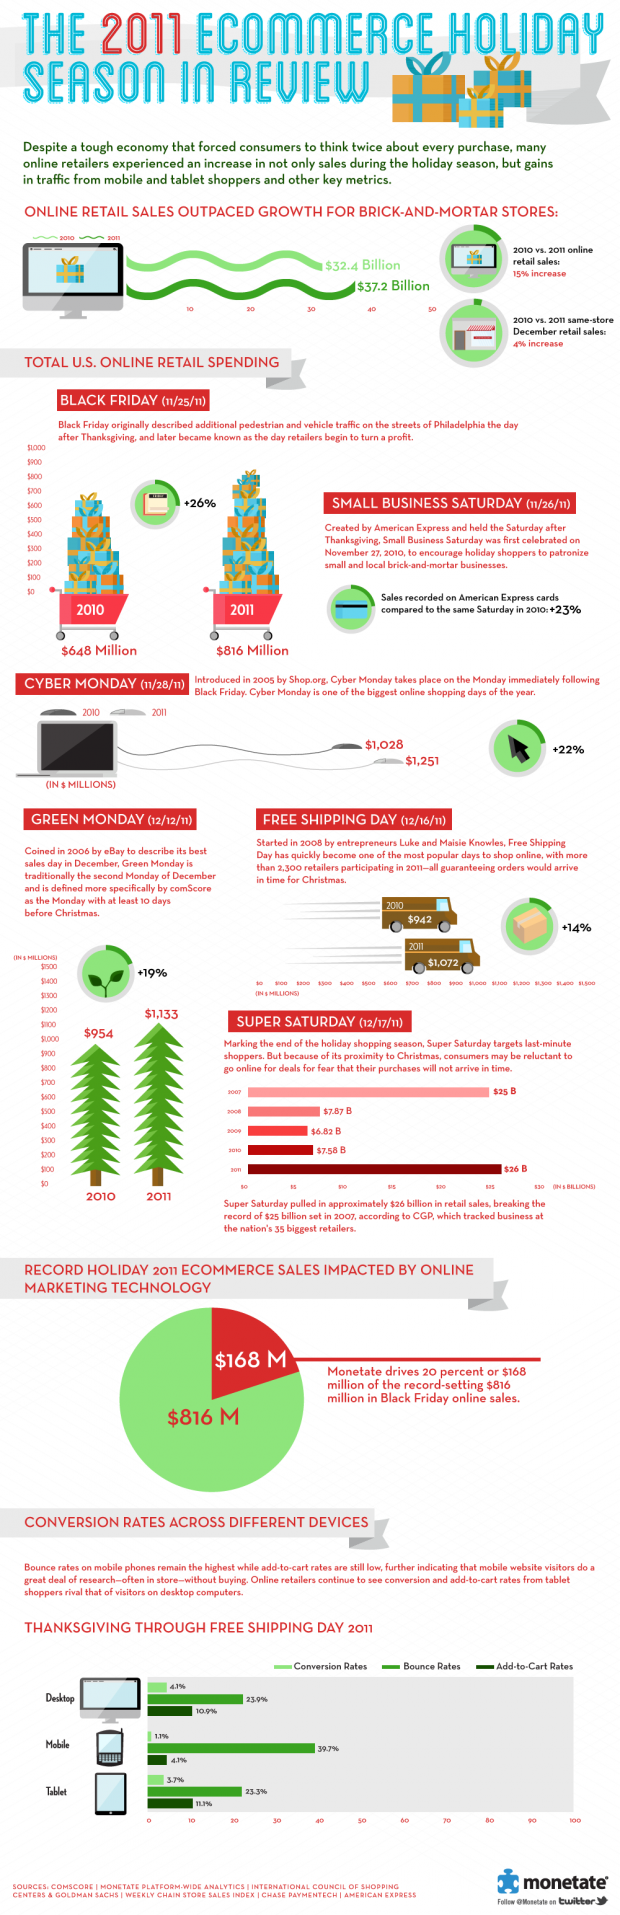 The 2011 Ecommerce Holiday Season in Review